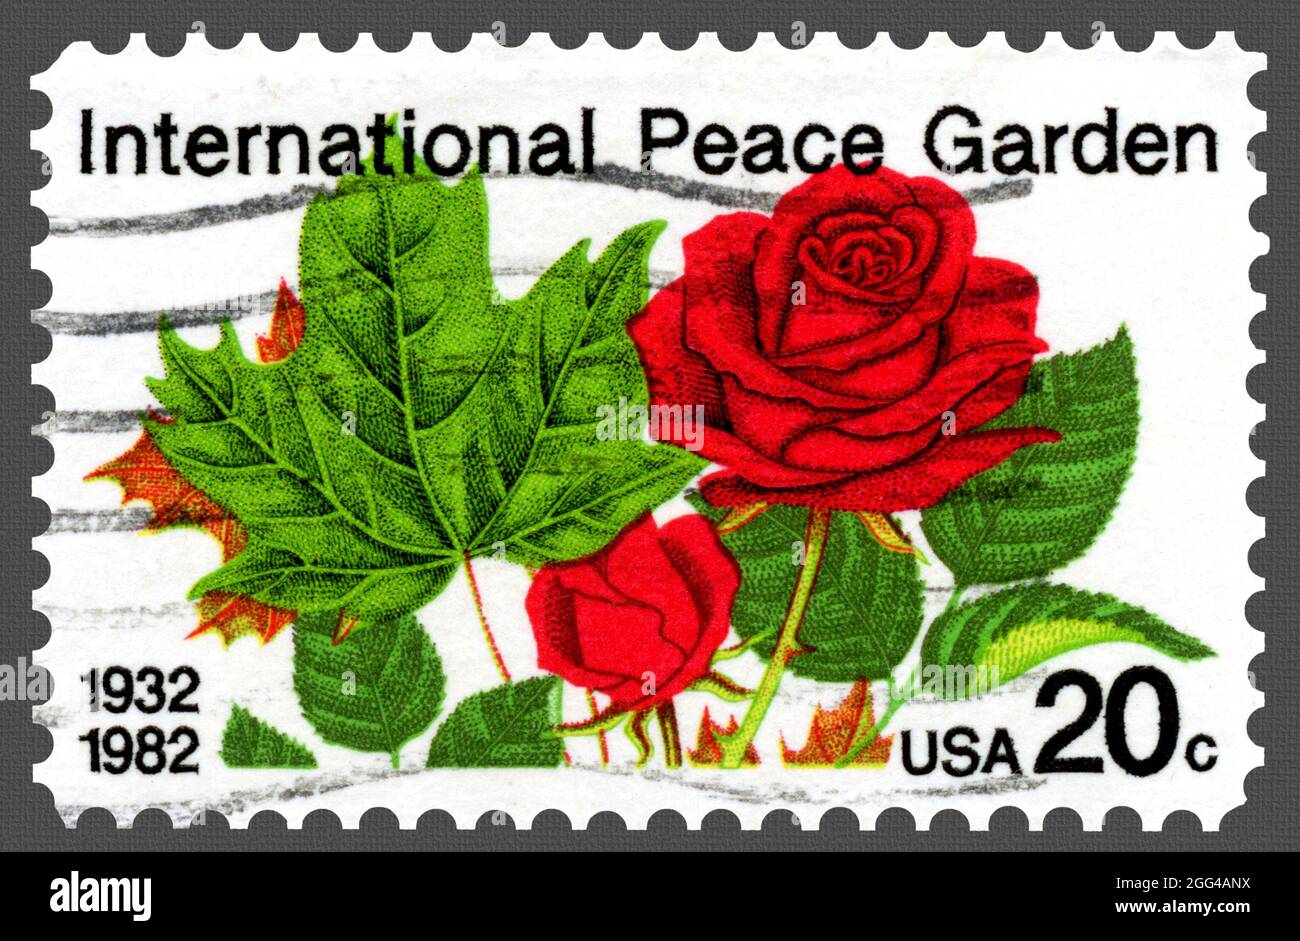 International Peace Garden Postage Stamp issued 1982. Stock Photo